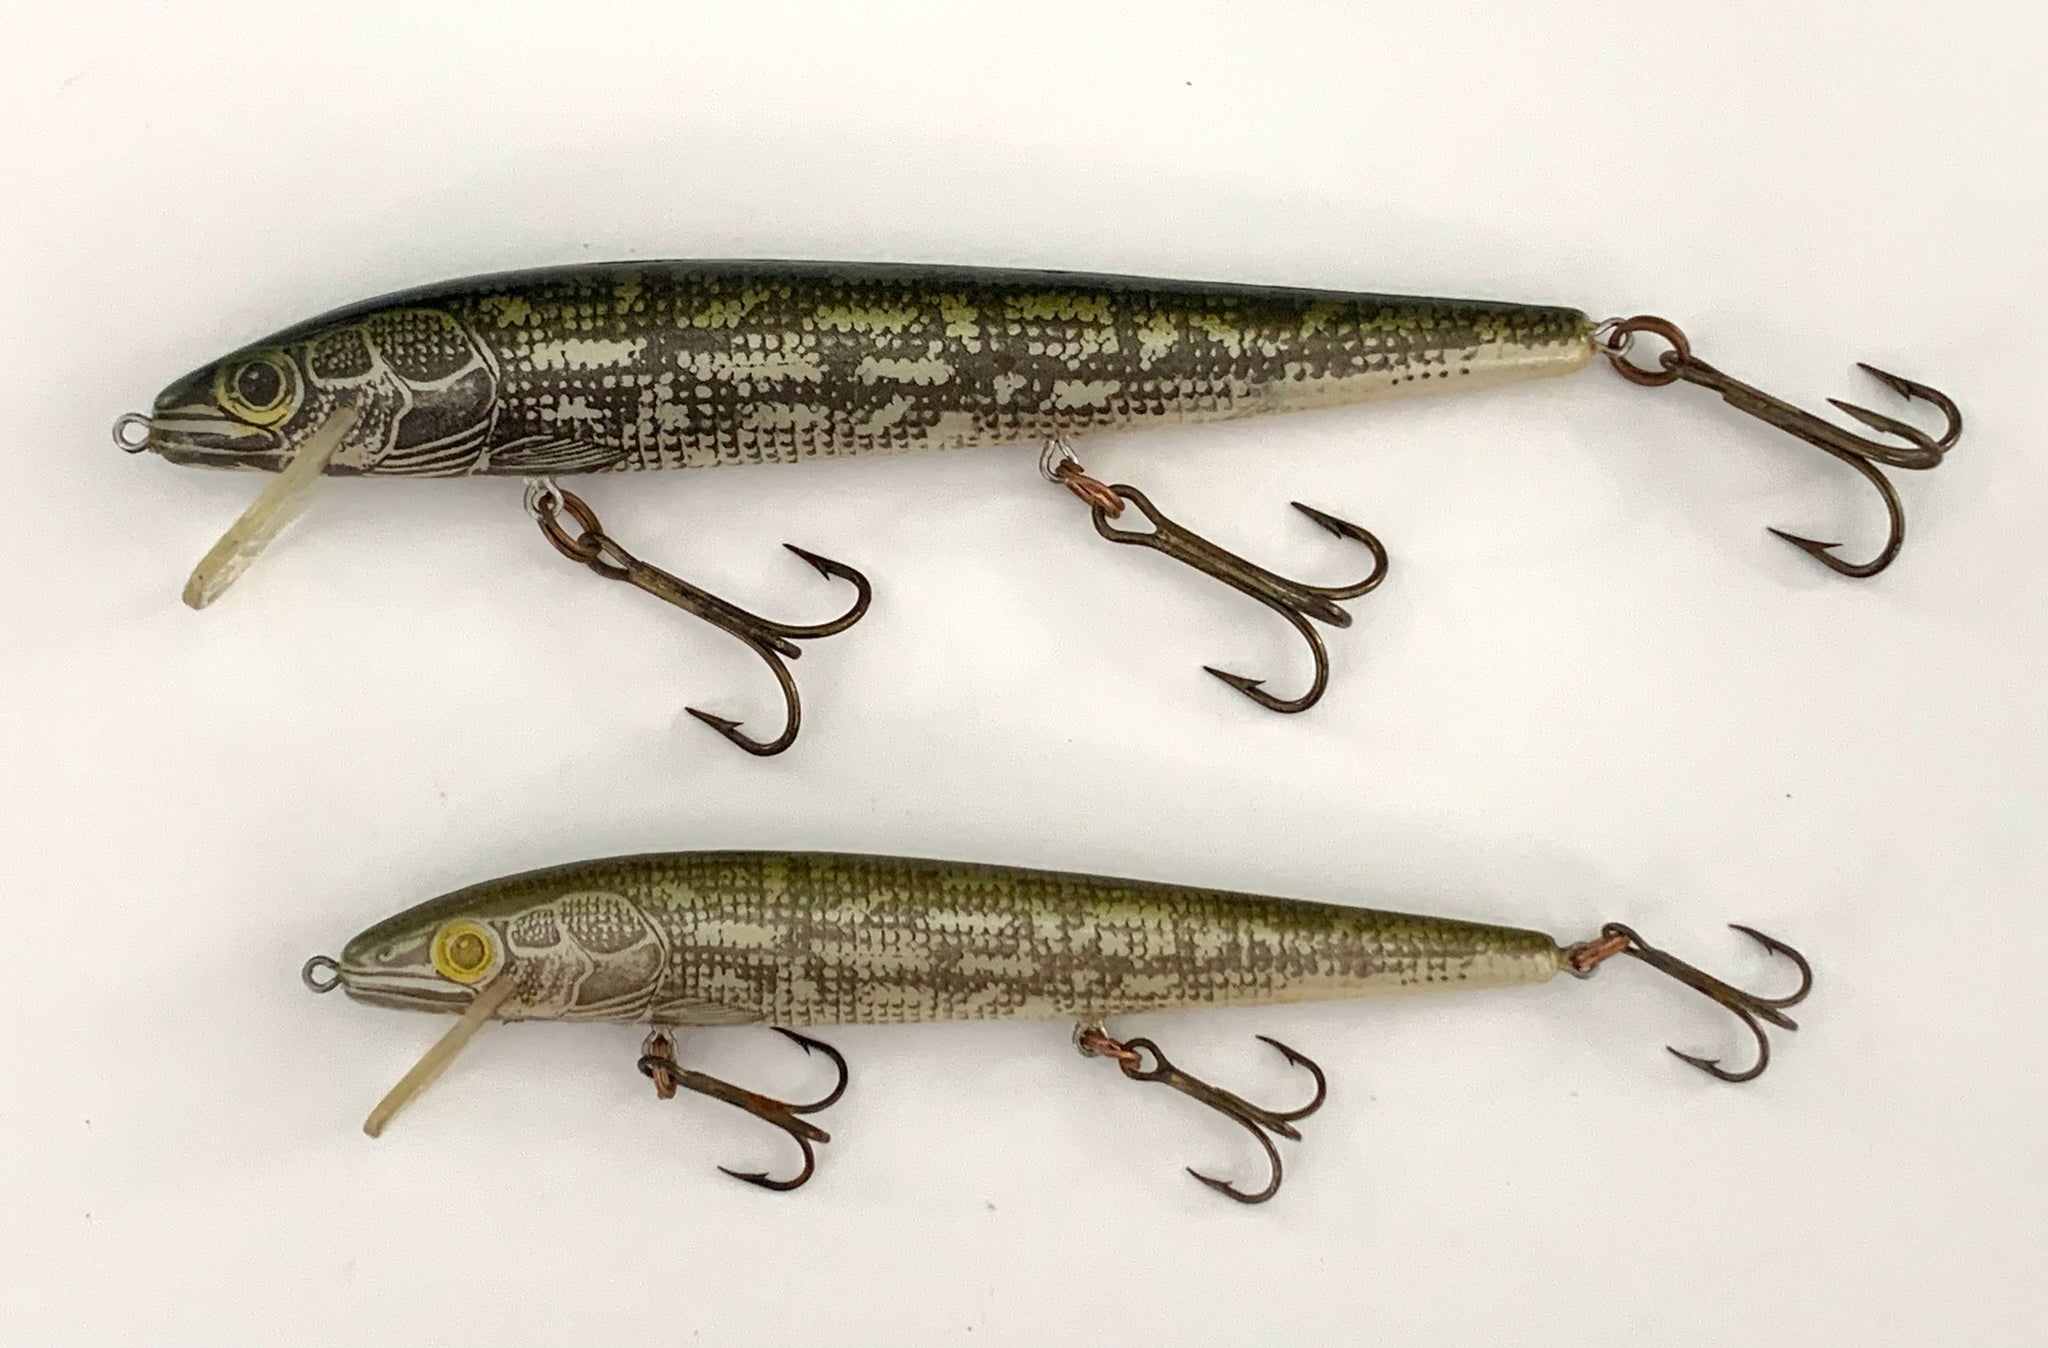 Lot of 2 REBEL LURES 4.5 & 5.5 MINNOW Fishing Lures • NATURALIZED PI –  Toad Tackle